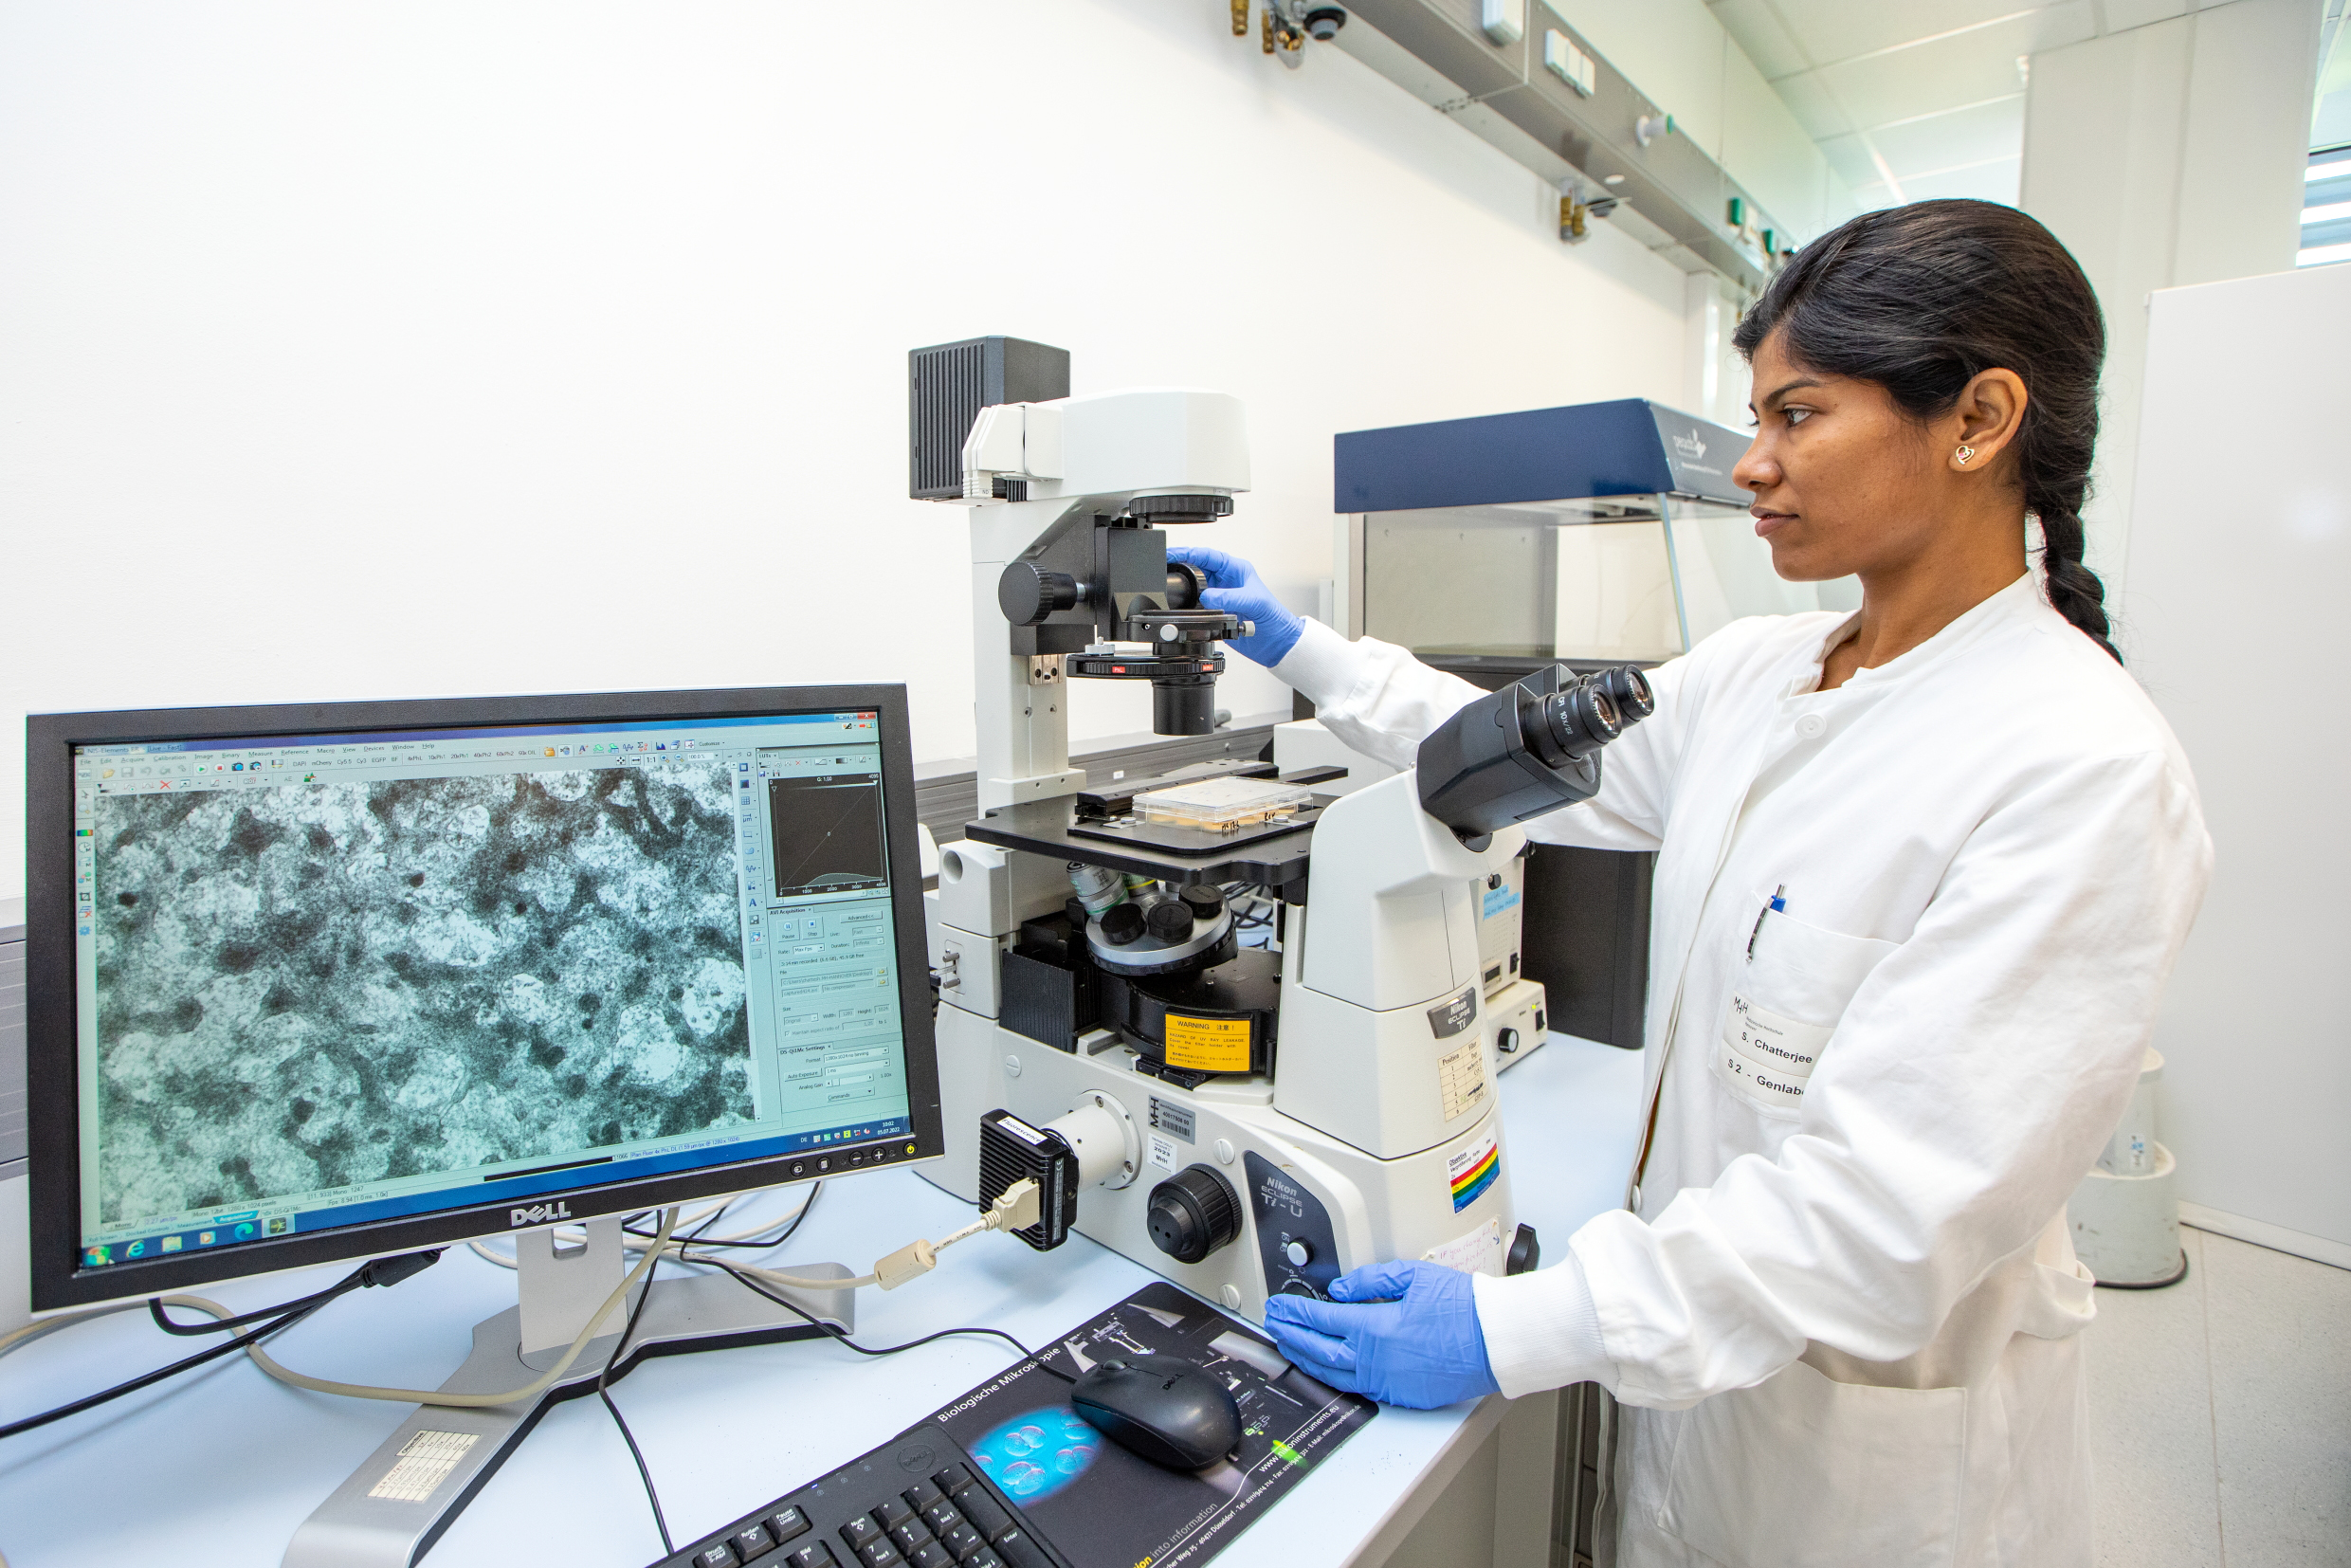 Dr Shambhabi Chatterjee stands in the laboratory in front of a screen showing heart muscle cells.